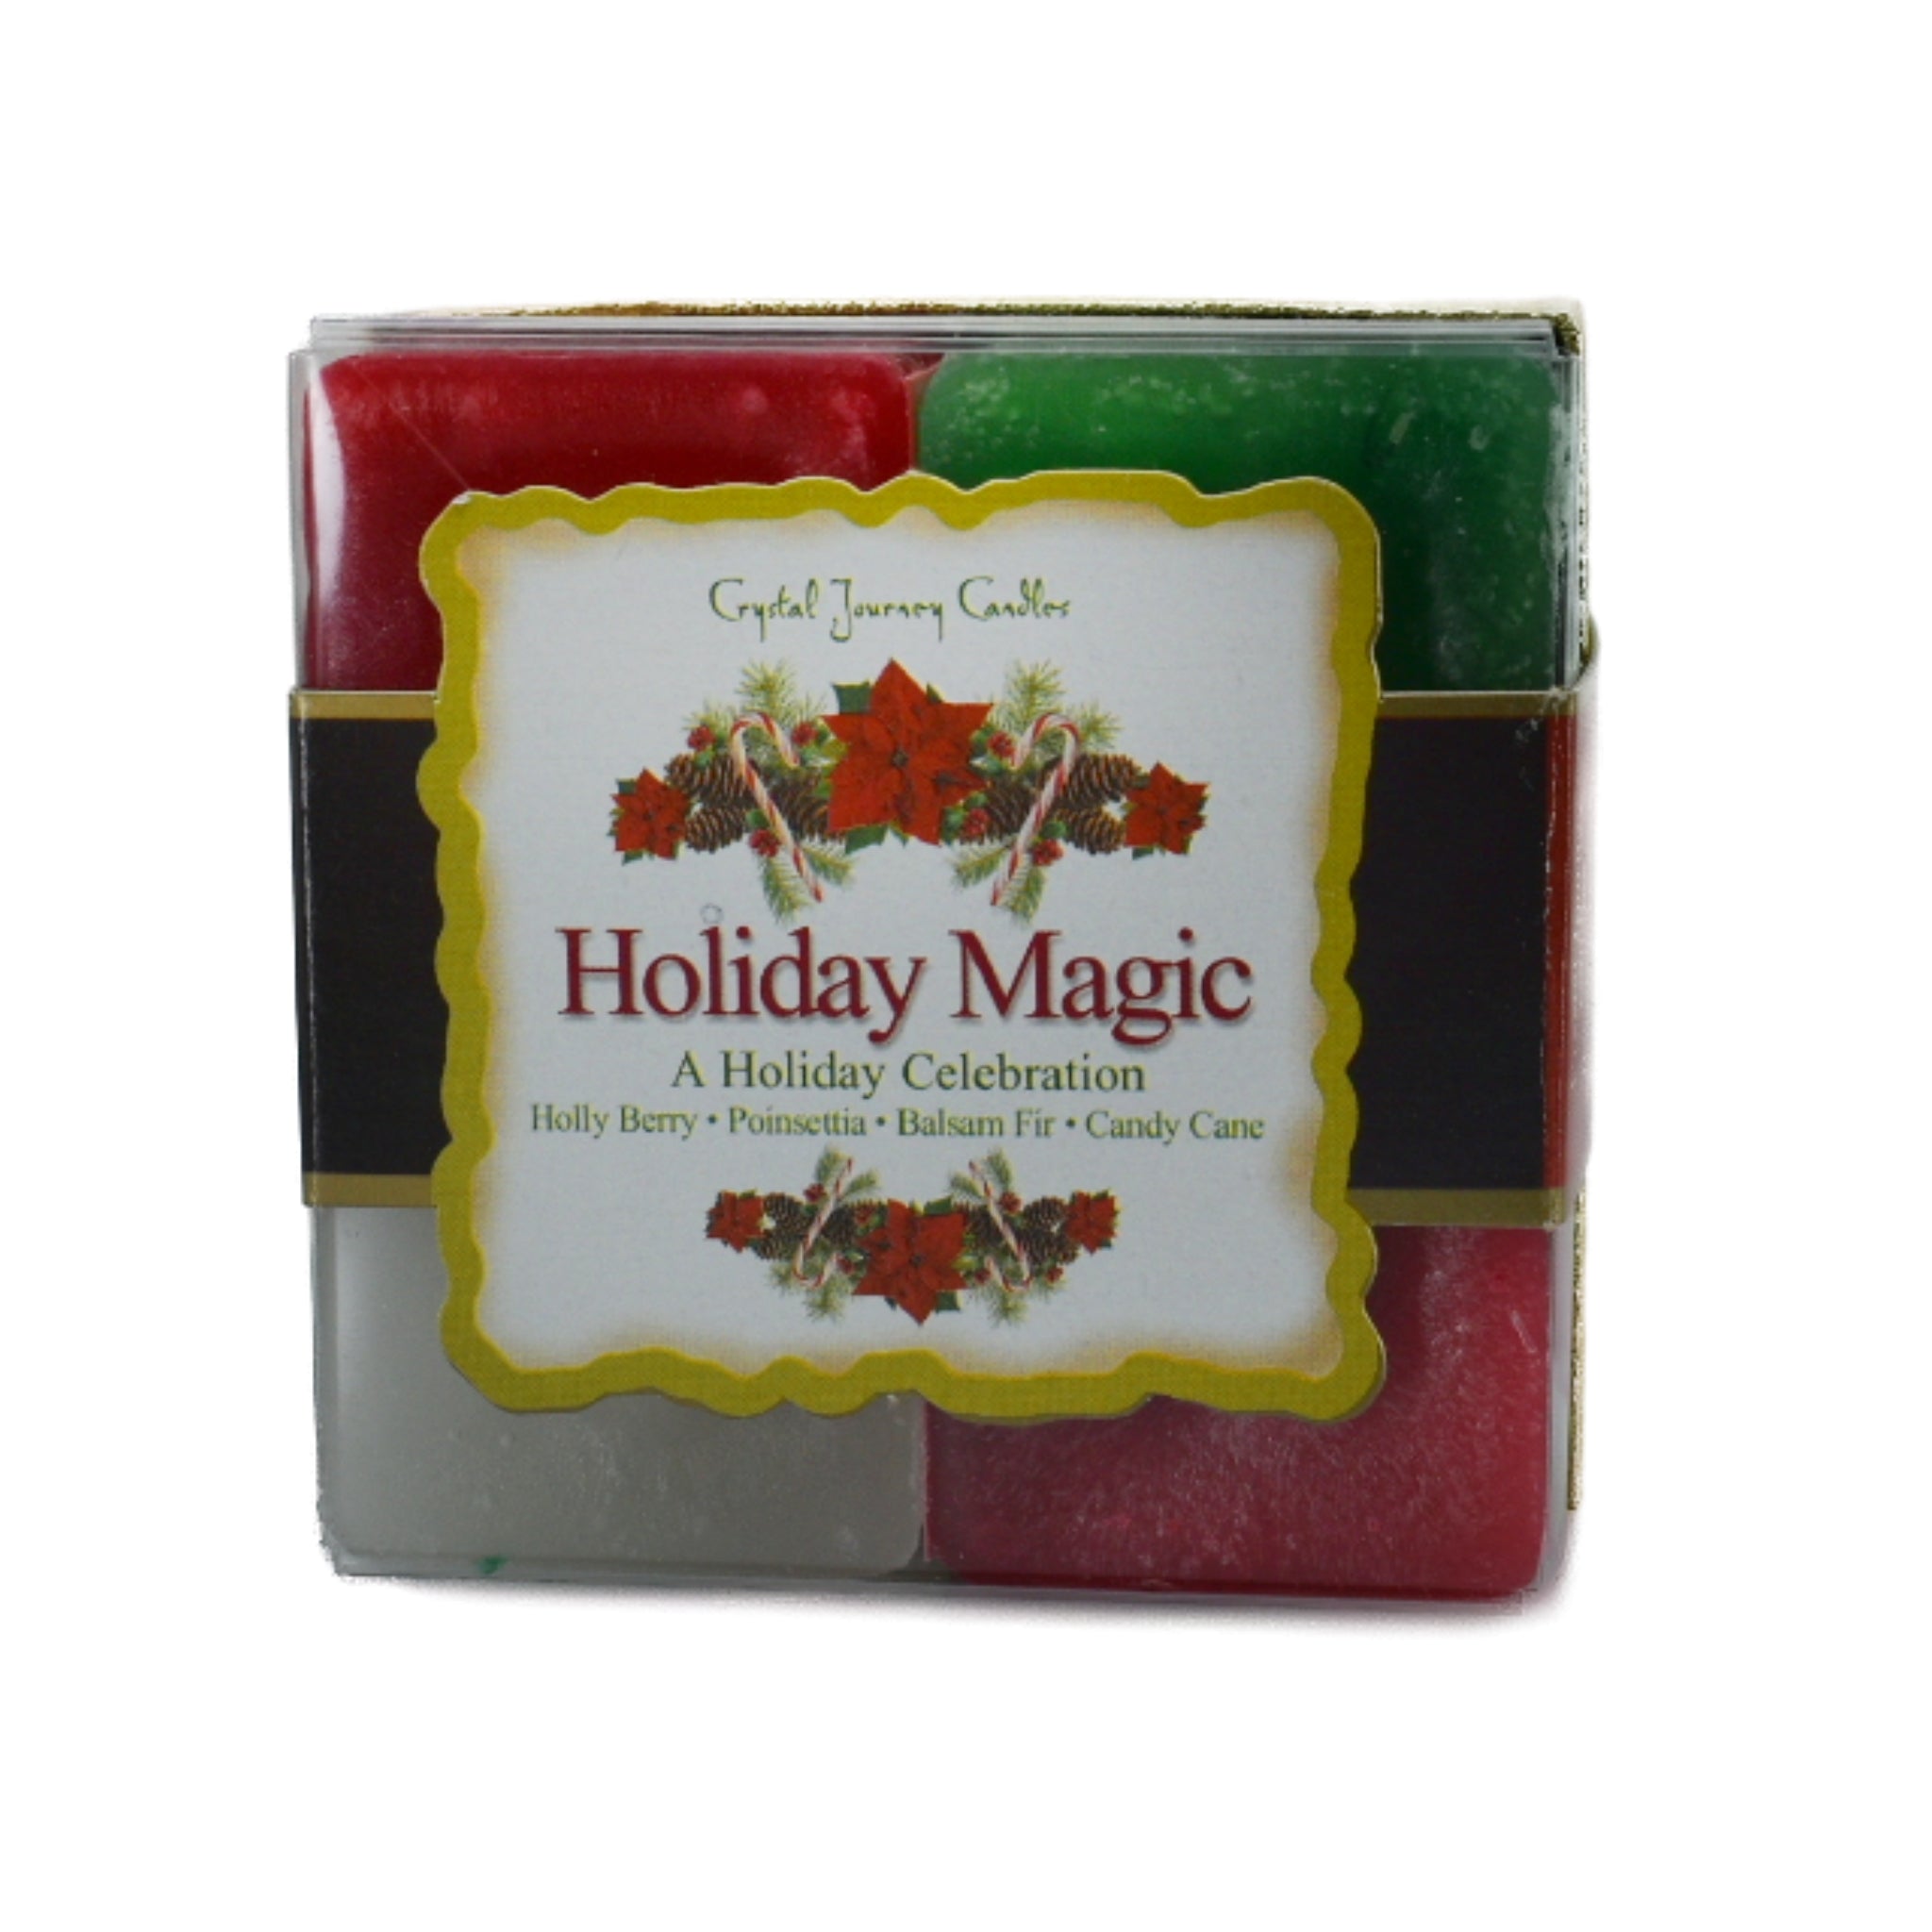 Holiday Magic Square Pack Candle.  Celebrate the holiday season and winter with these white, green and two red candles.  Candles are scented with poinsettia, balsam, holly berry and candy cane.  